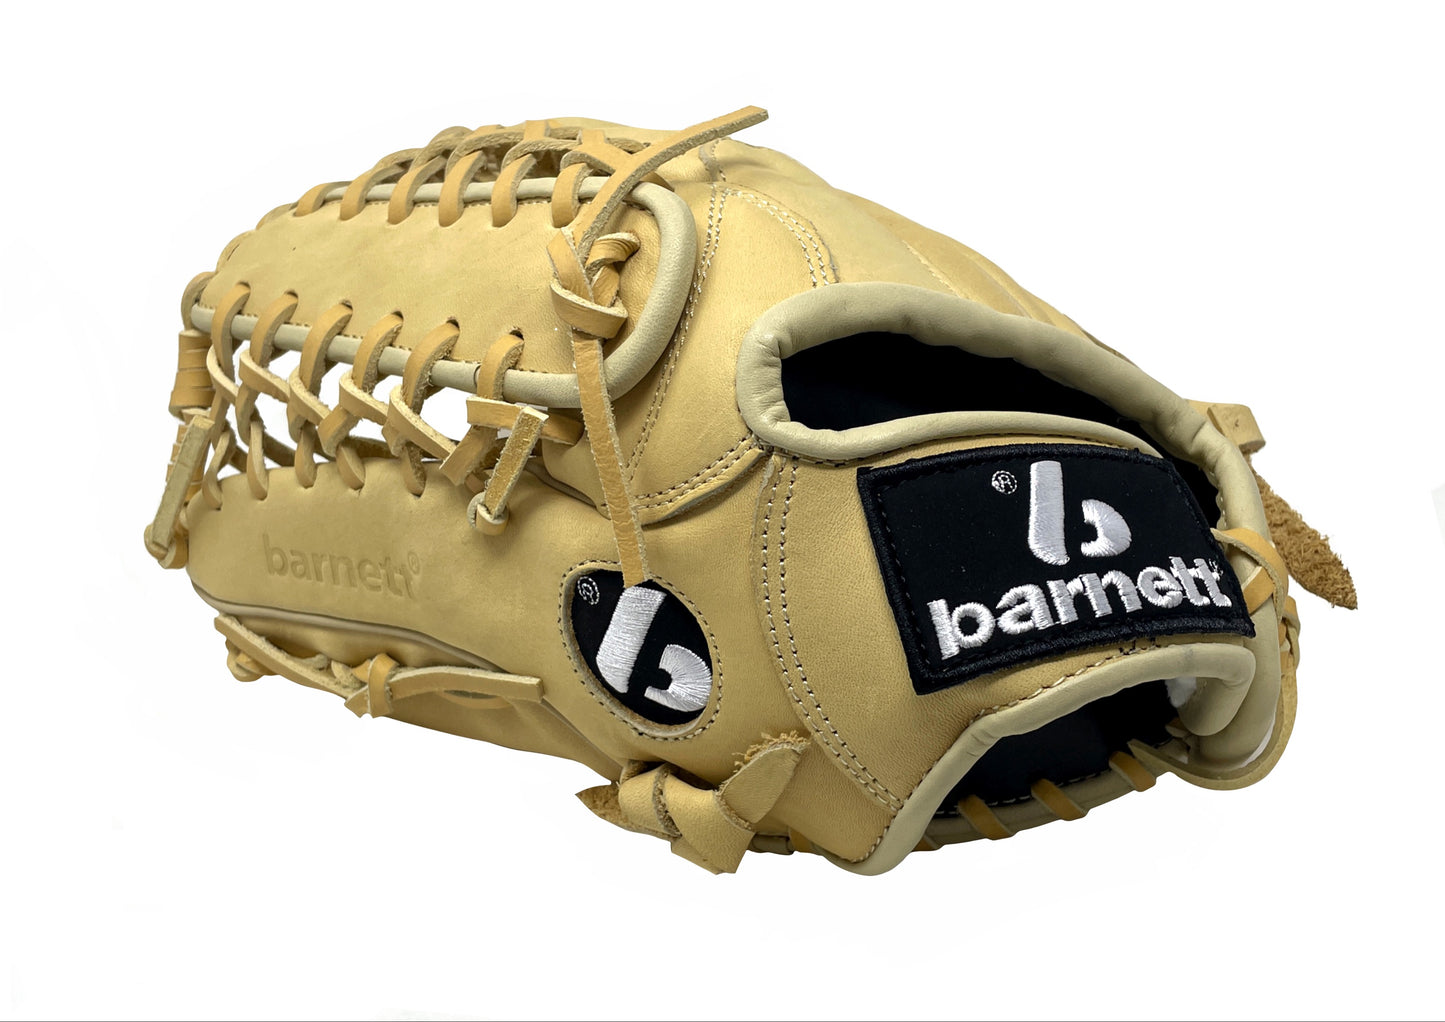 FL-127 High quality leather baseball glove, infield / outfield / pitcher, Beige